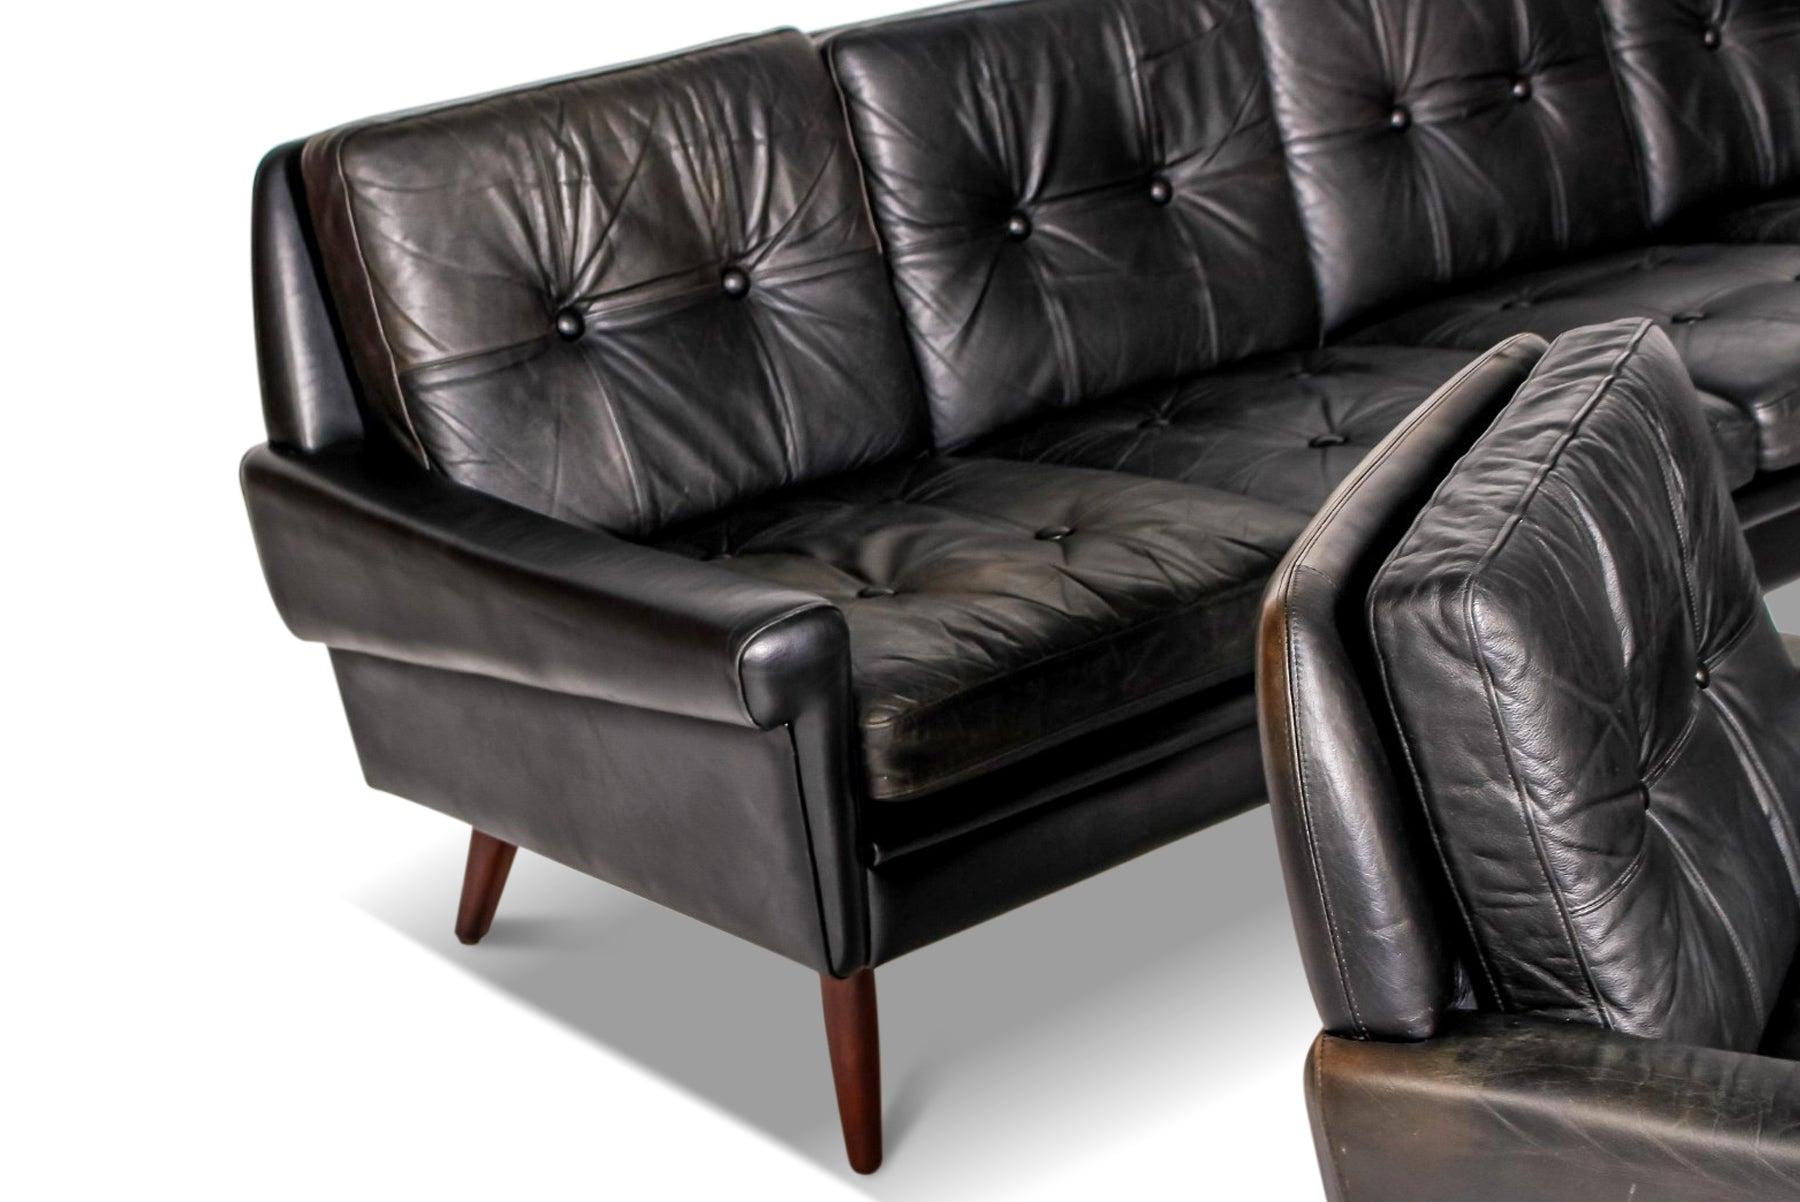 Mid-Century Modern Svend Skipper Four Seat Sofa in Black Leather + Pair of Matching Armchairs For Sale